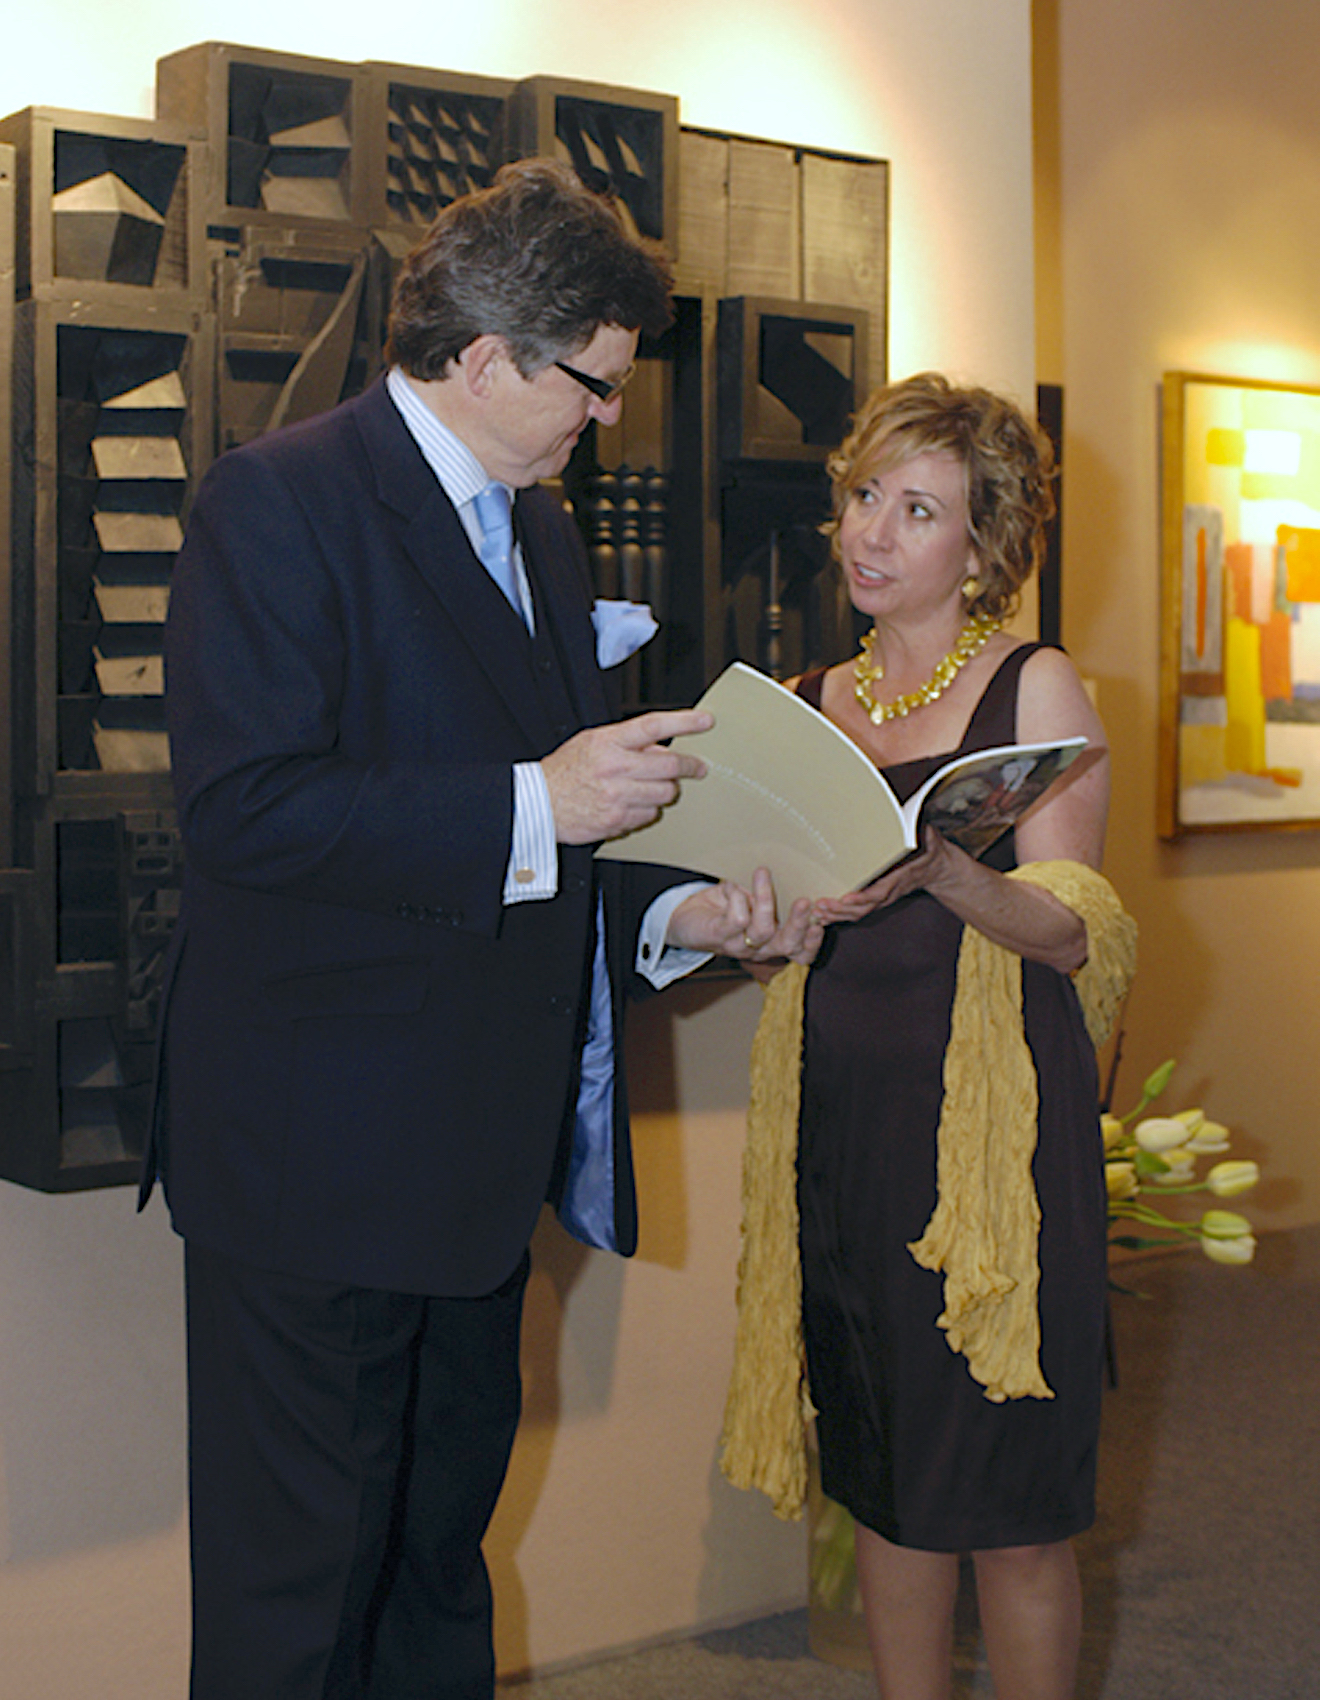 Jonathan Dodd discussing an artwork with another dealer